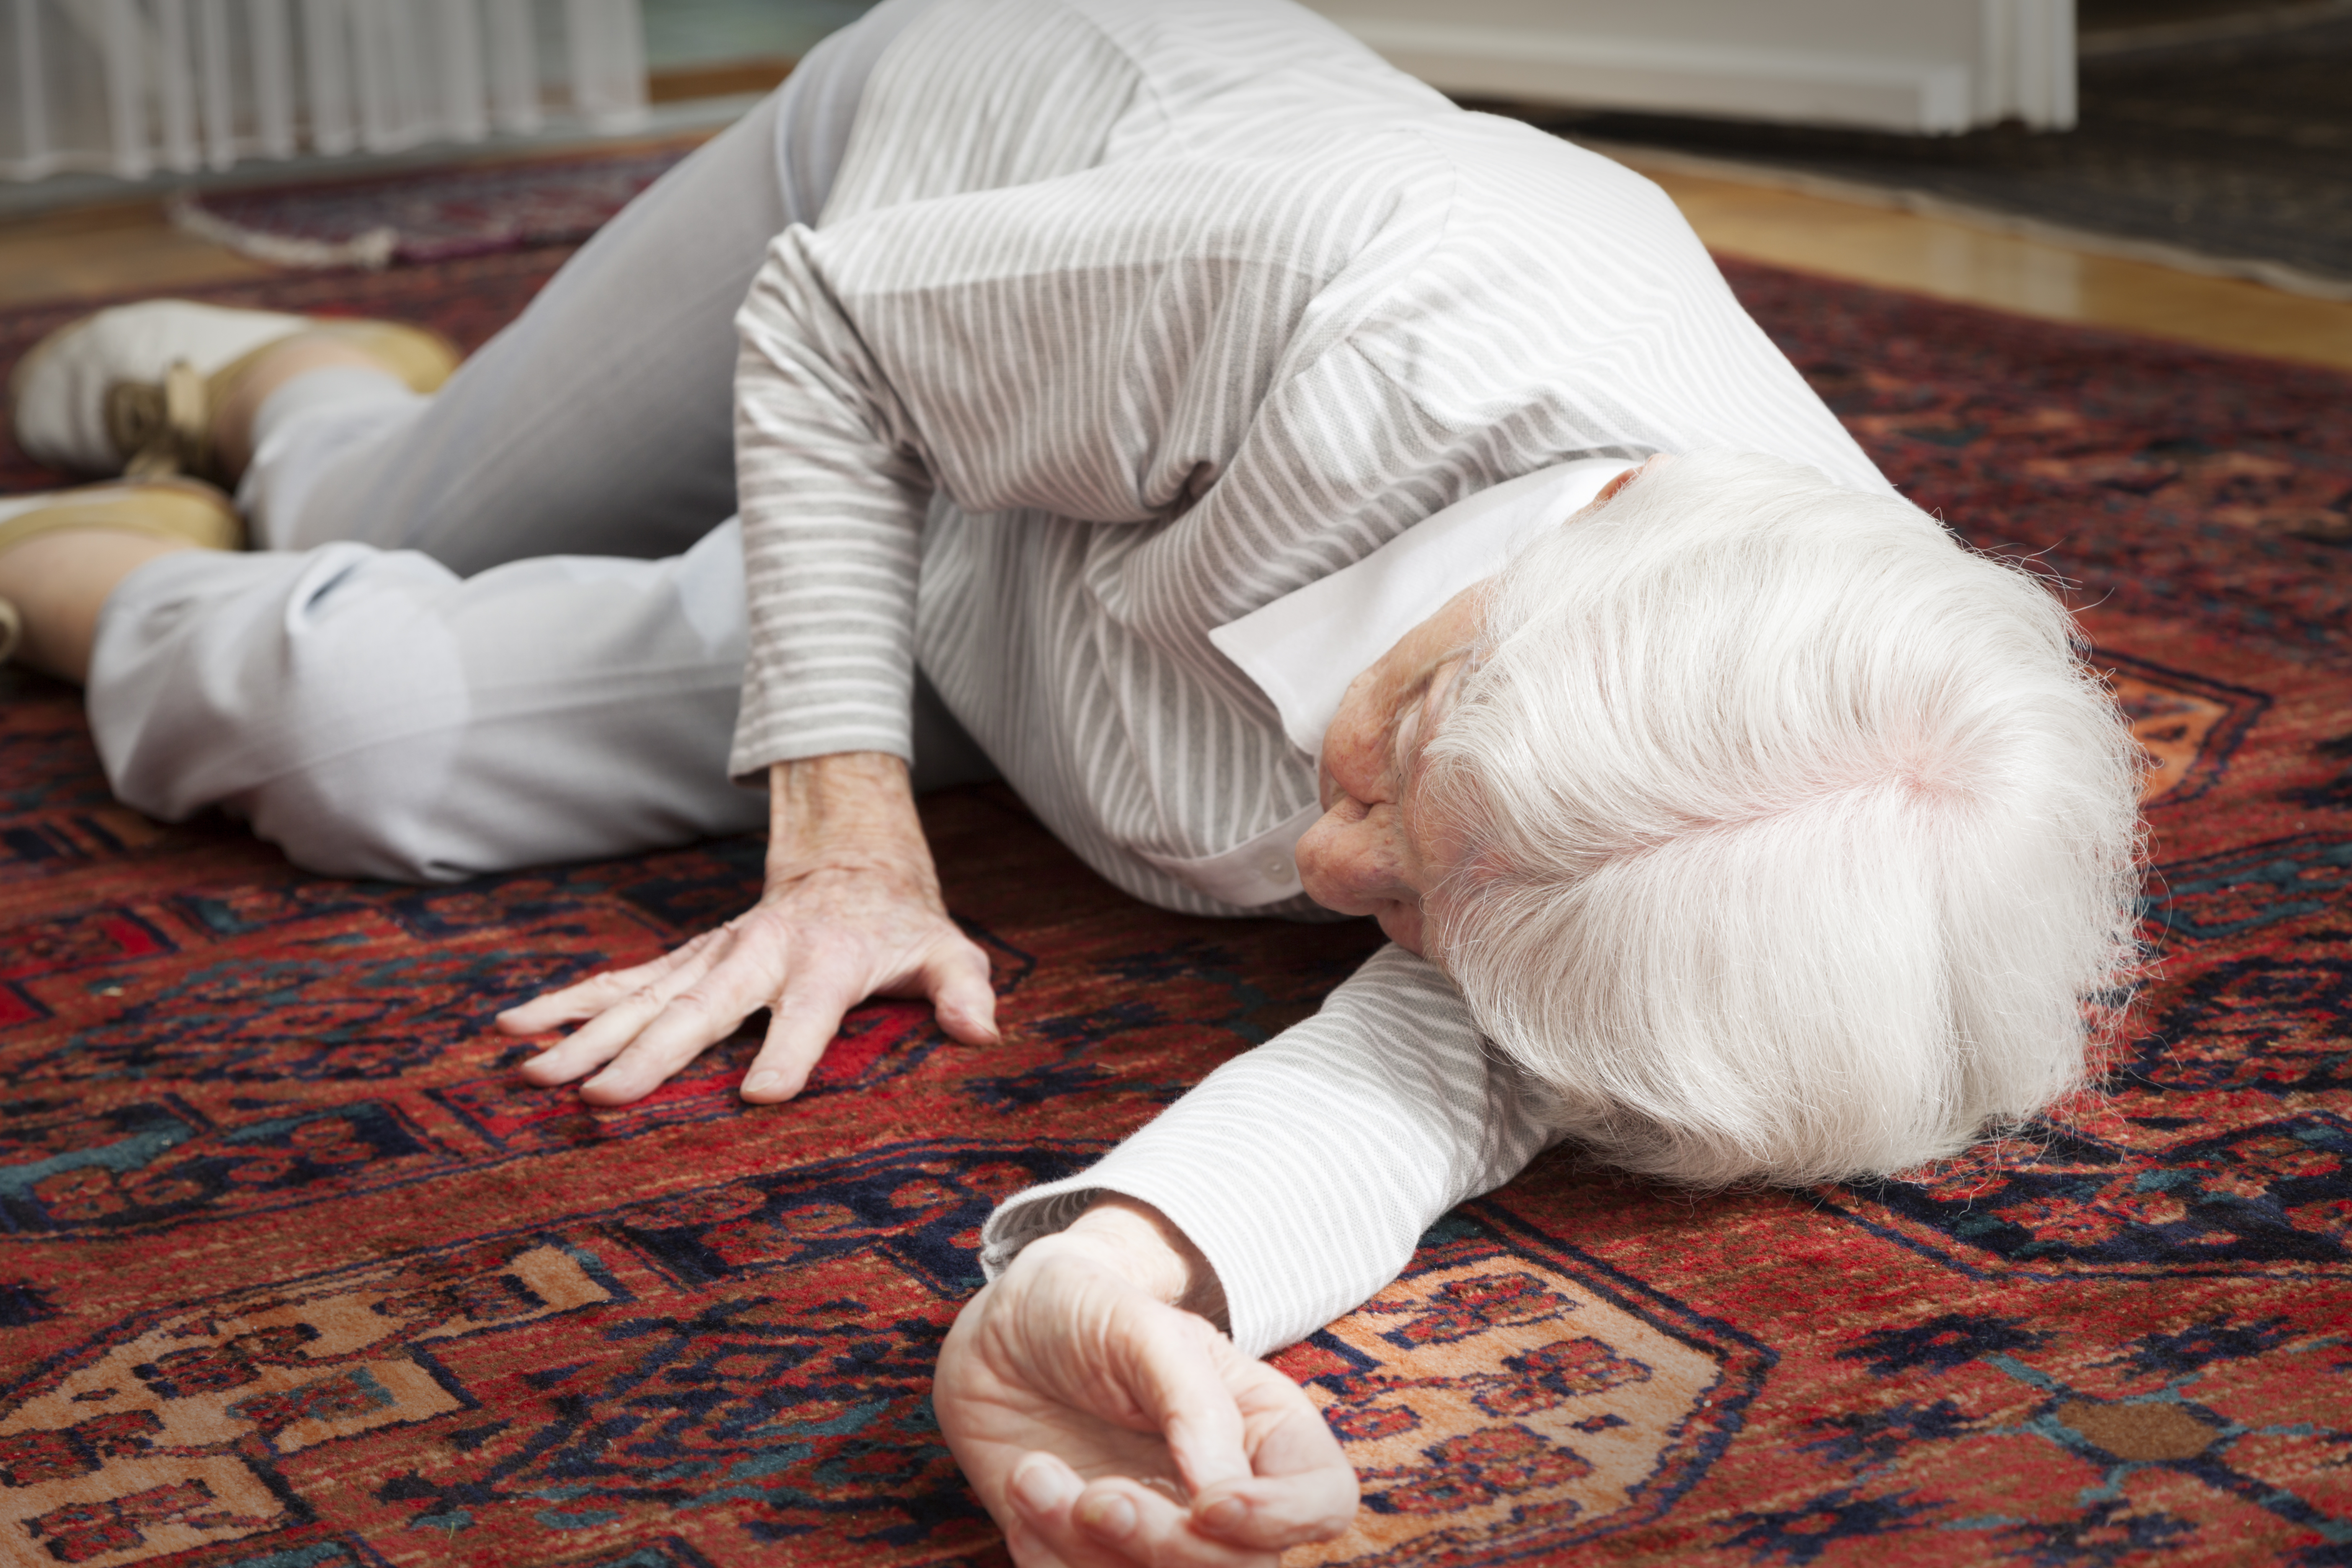 An elderly woman lying on the floor after a fall. (Getty Images)